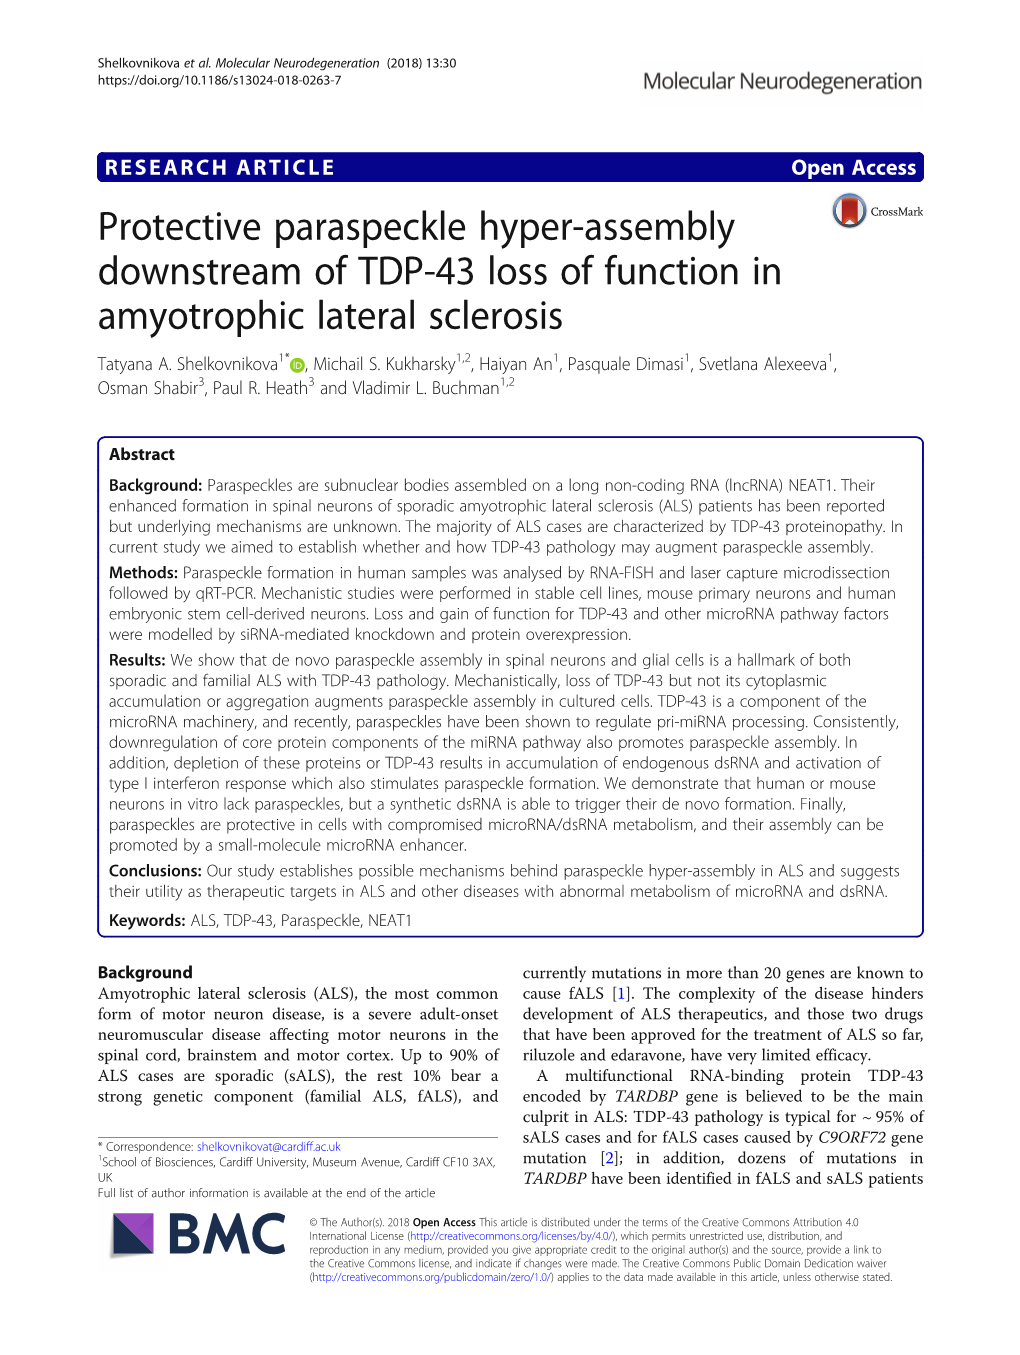 Protective Paraspeckle Hyper-Assembly Downstream of TDP-43 Loss of Function in Amyotrophic Lateral Sclerosis Tatyana A